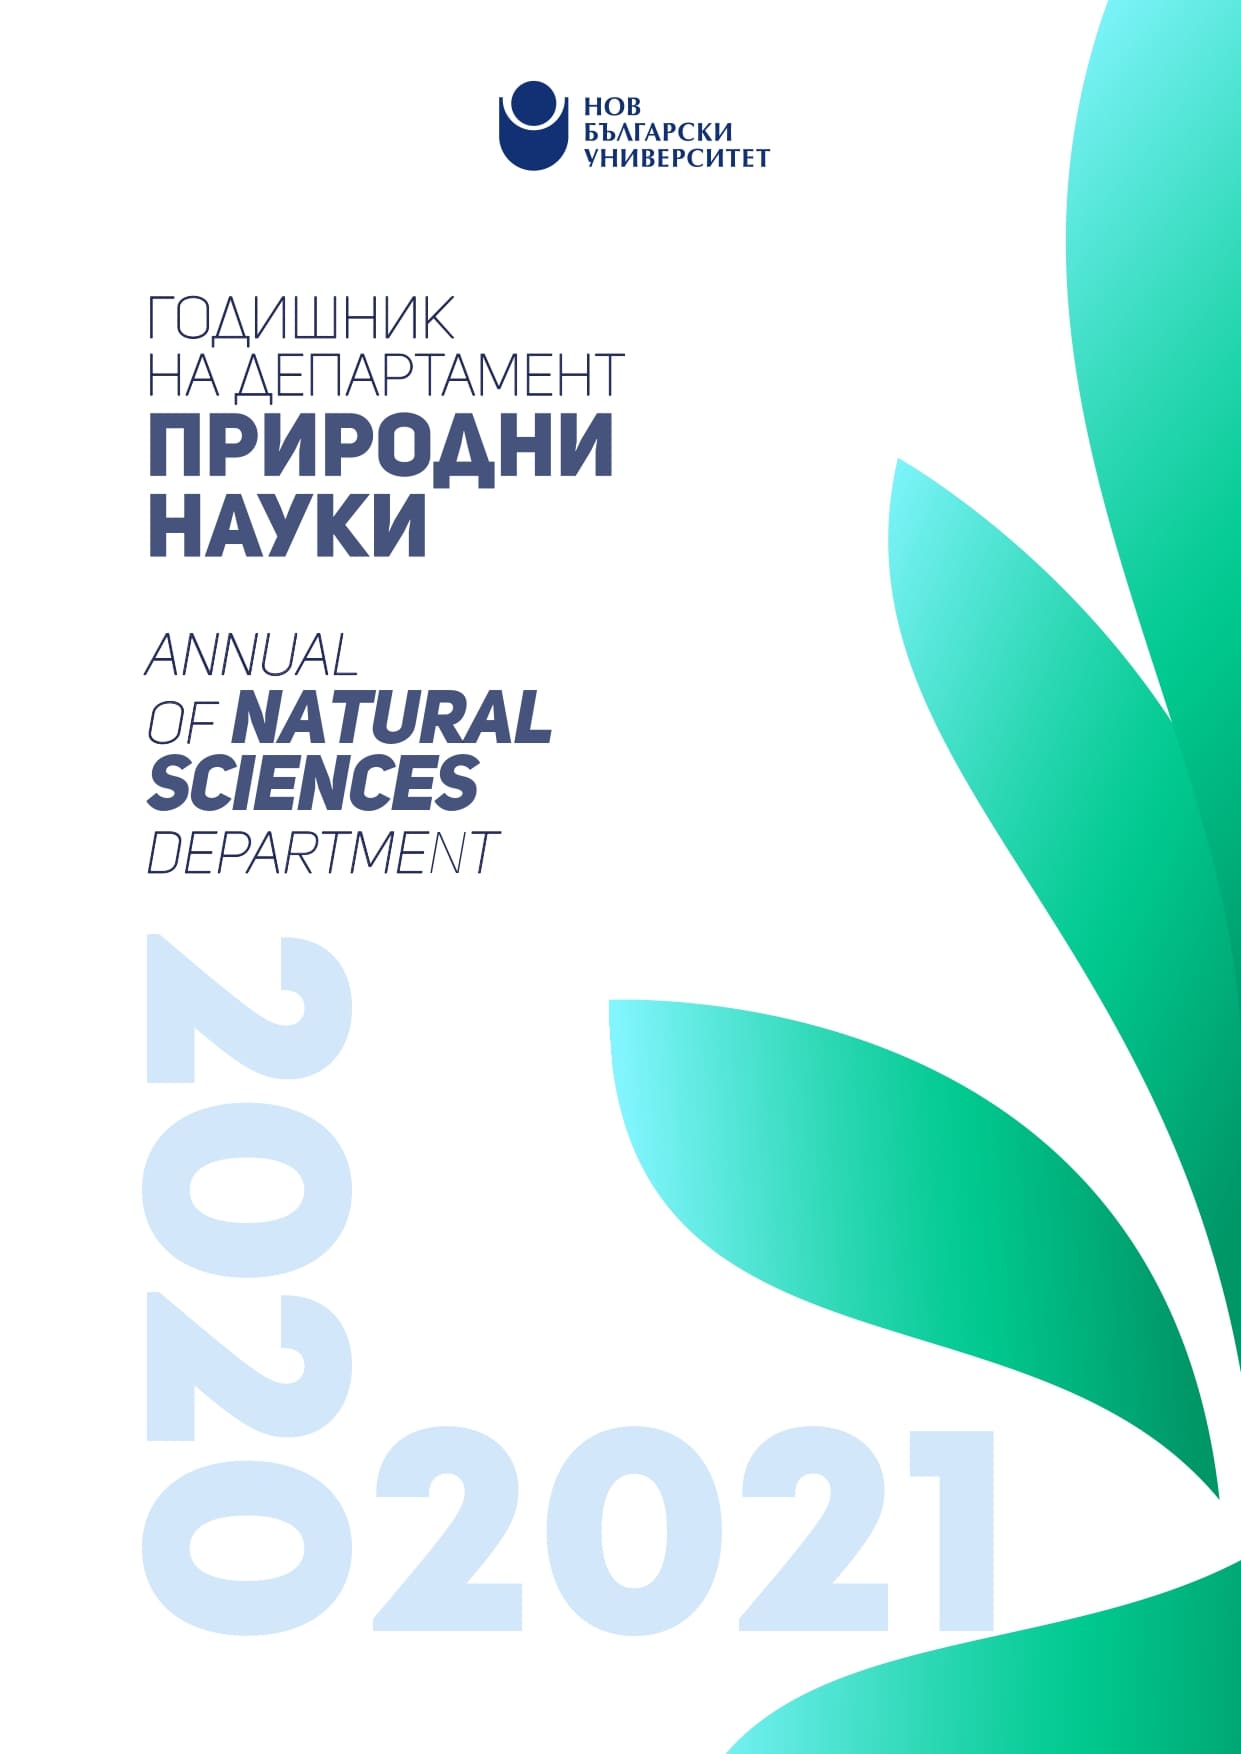 Successful Completion of an International Project of the Department of Natural Sciences at New Bulgarian University